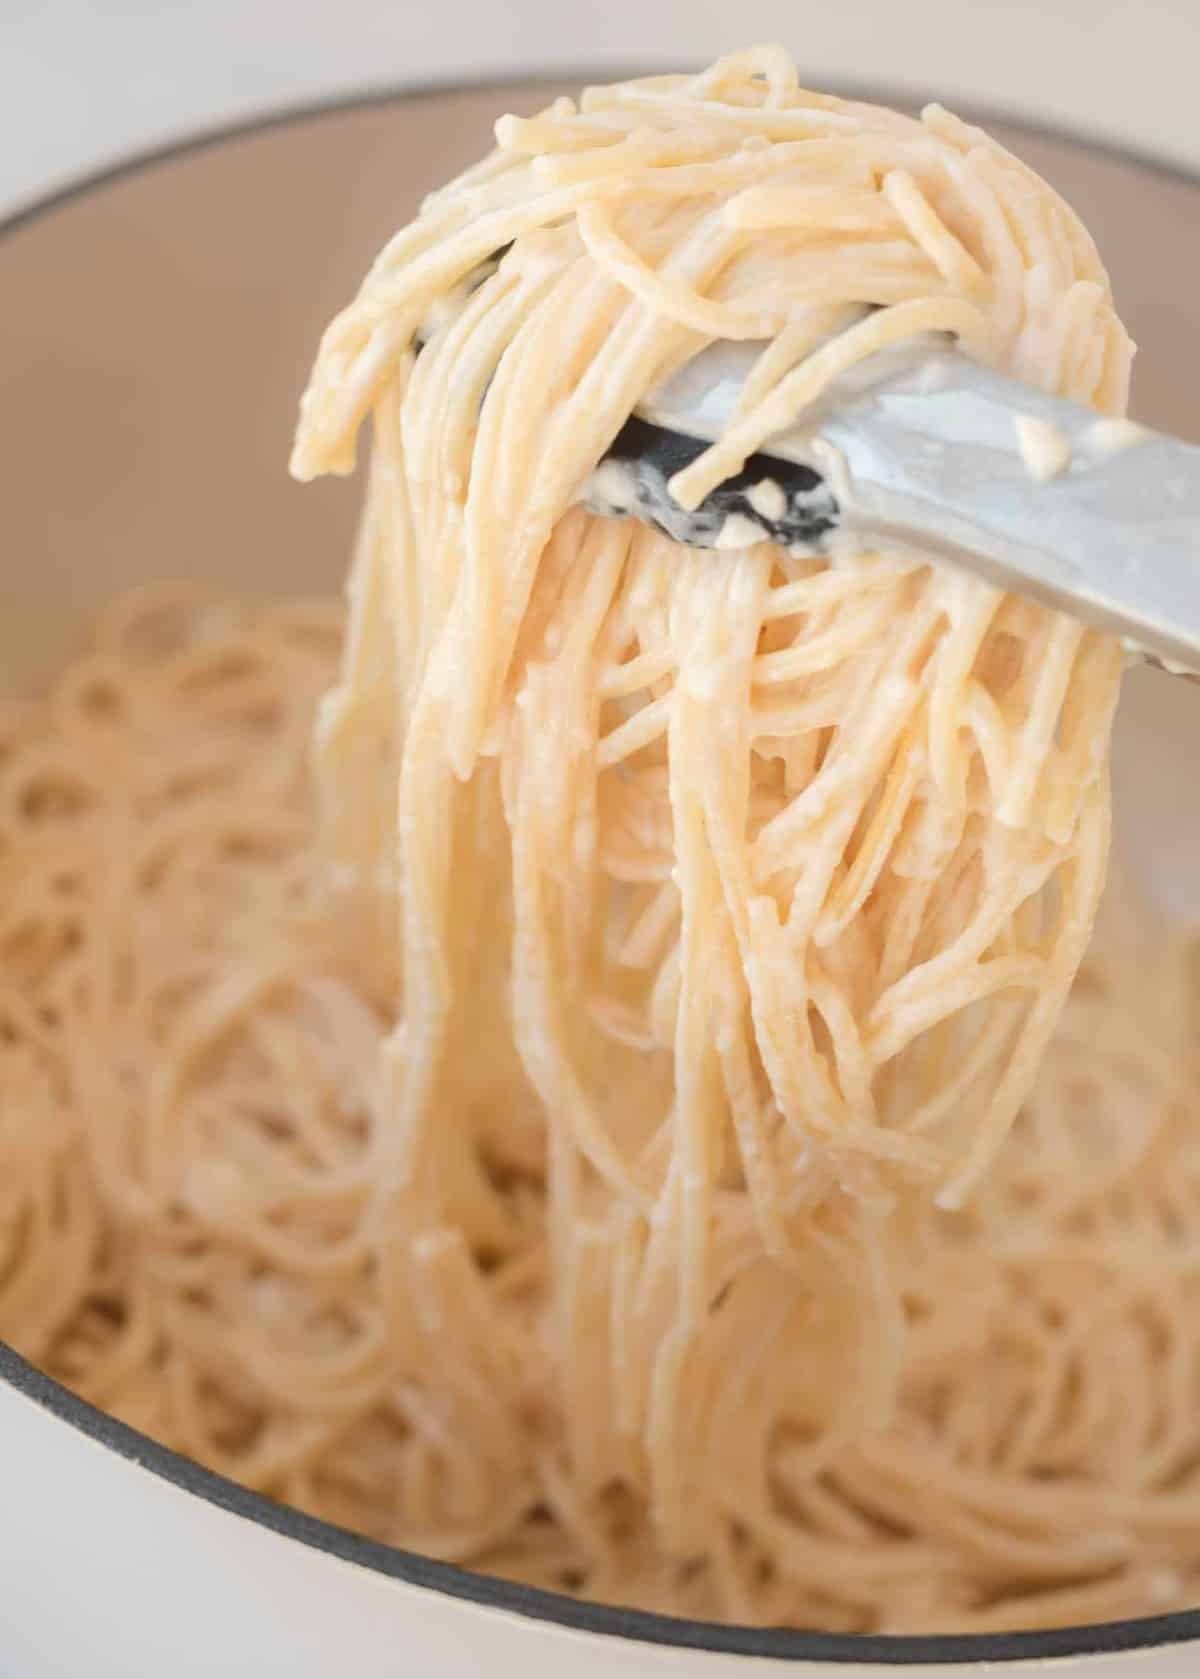 tons grabbing cream cheese spaghetti noodles from the pan